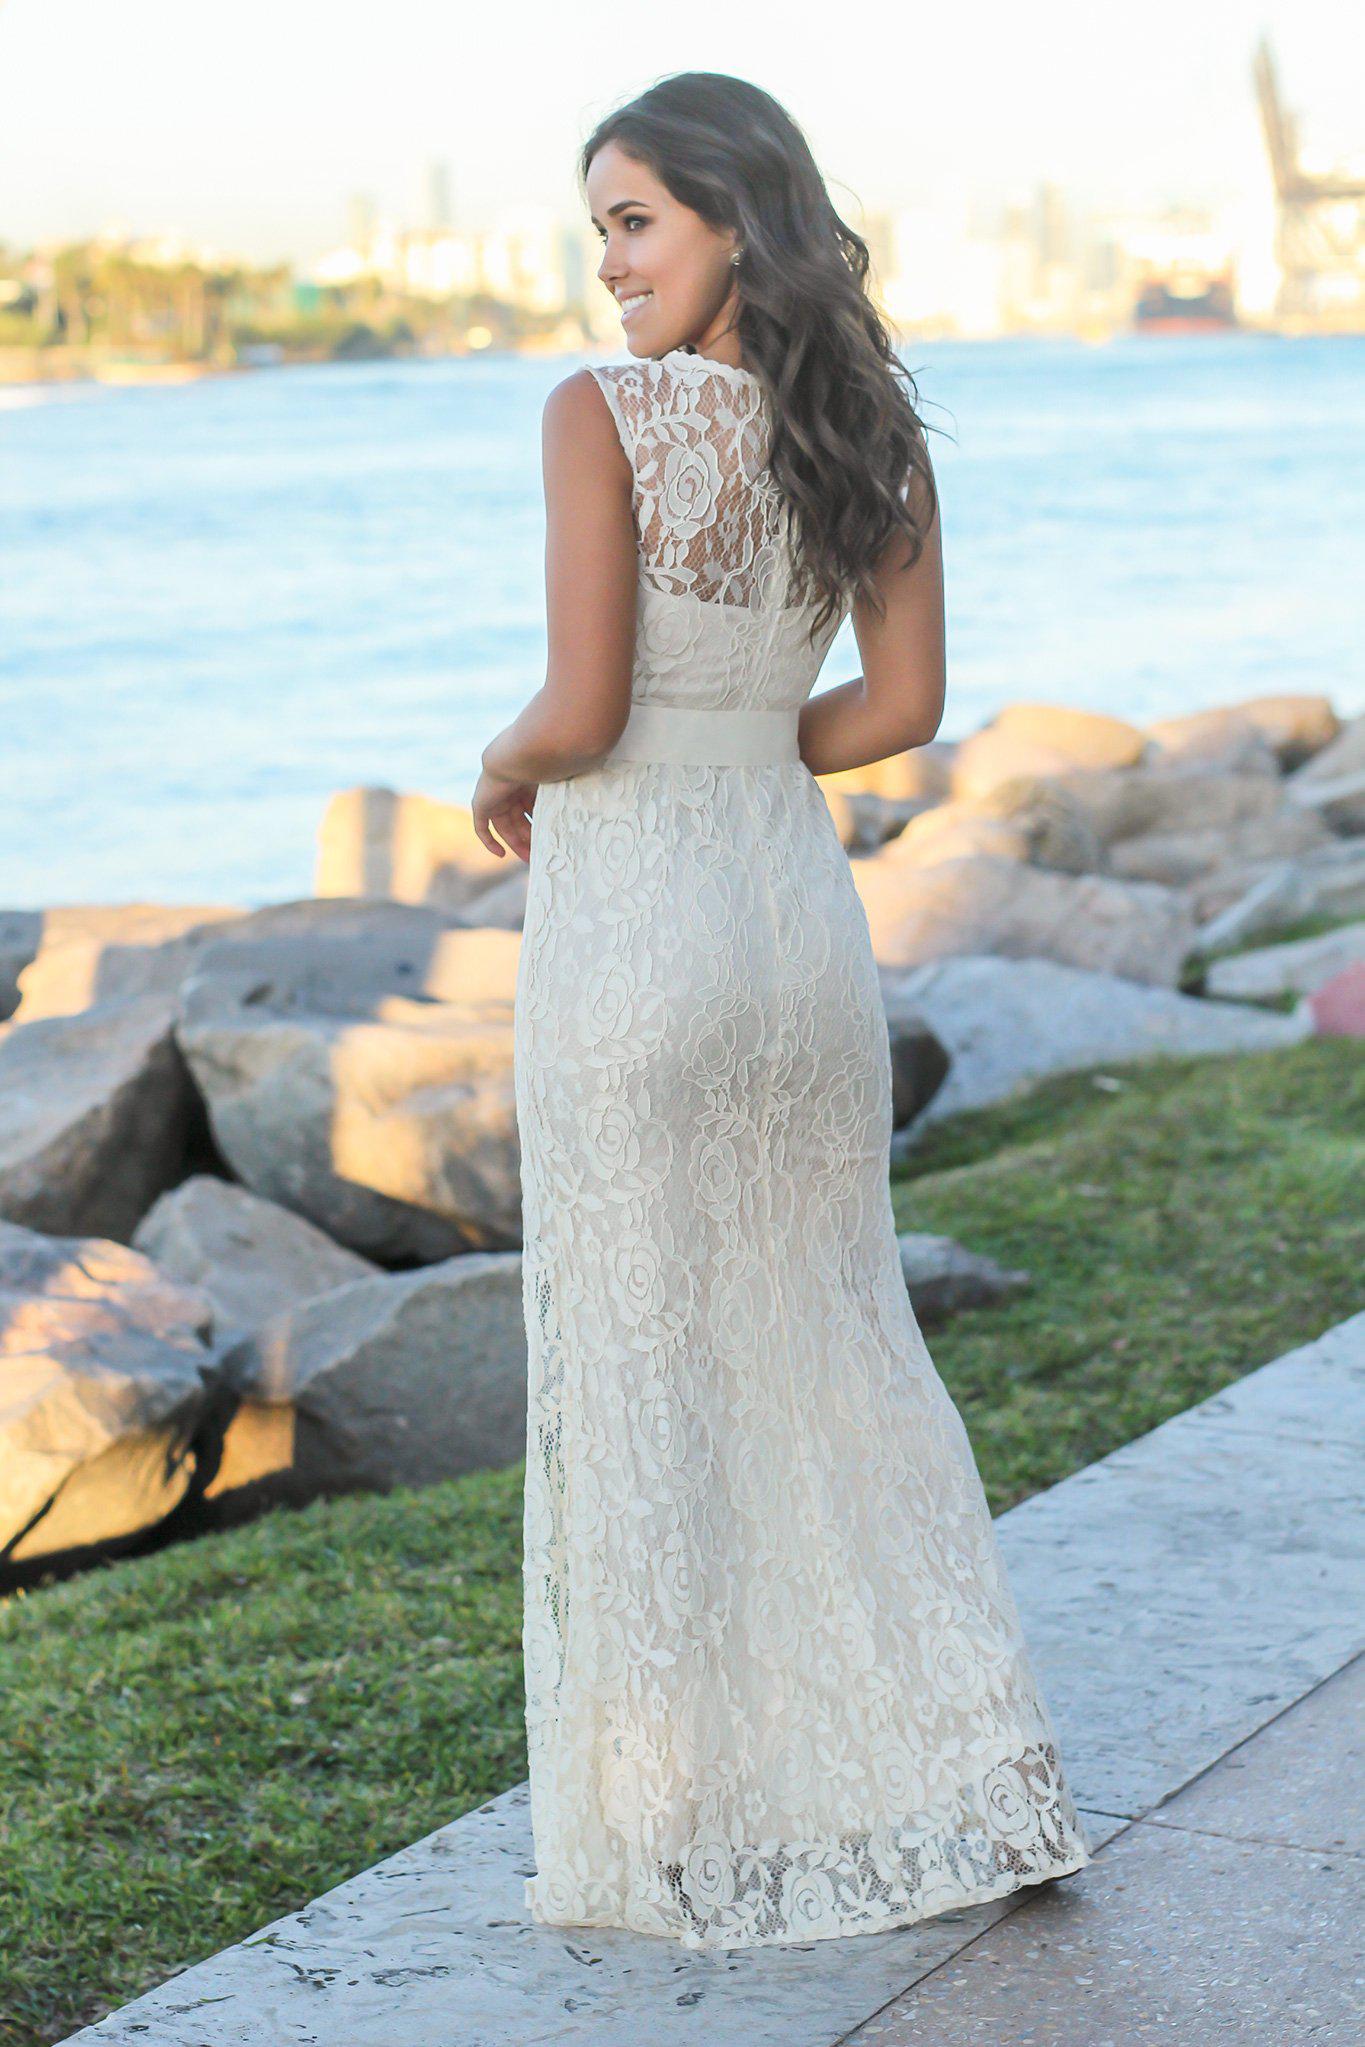 Beige Lace Maxi Dress with Tie Waist and Side Slit